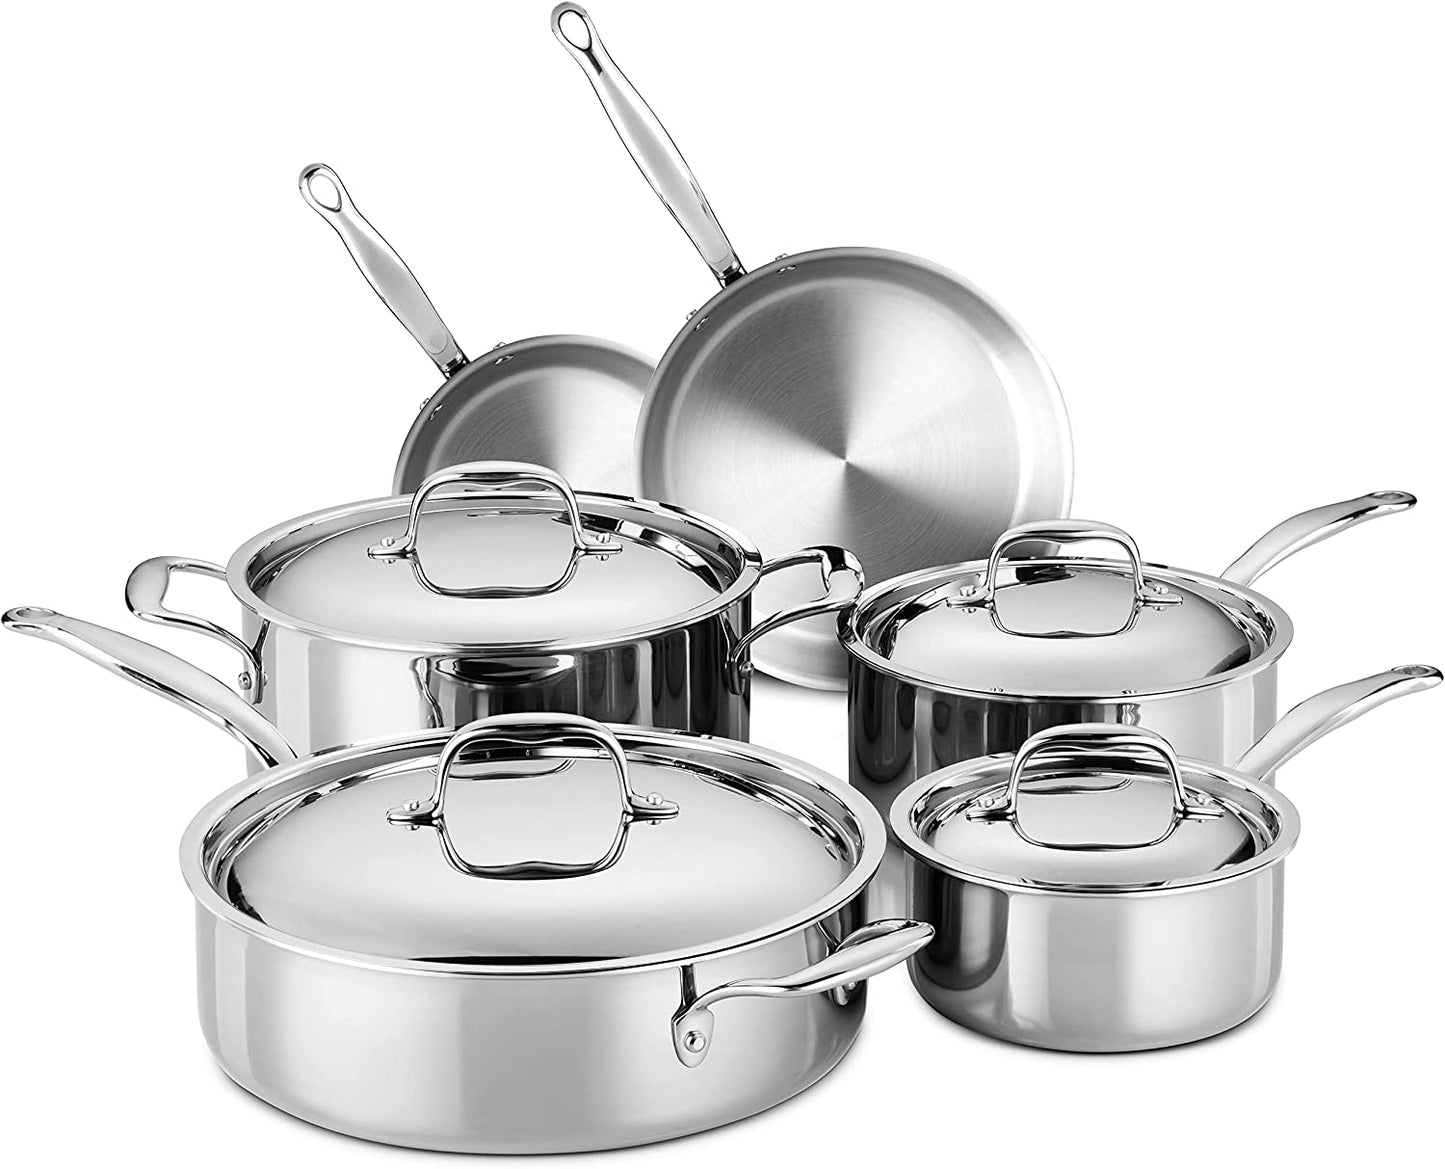 Legend 5-Ply Super Stainless Steel Cookware w/ Aluminum Core 14 Piece Set  New